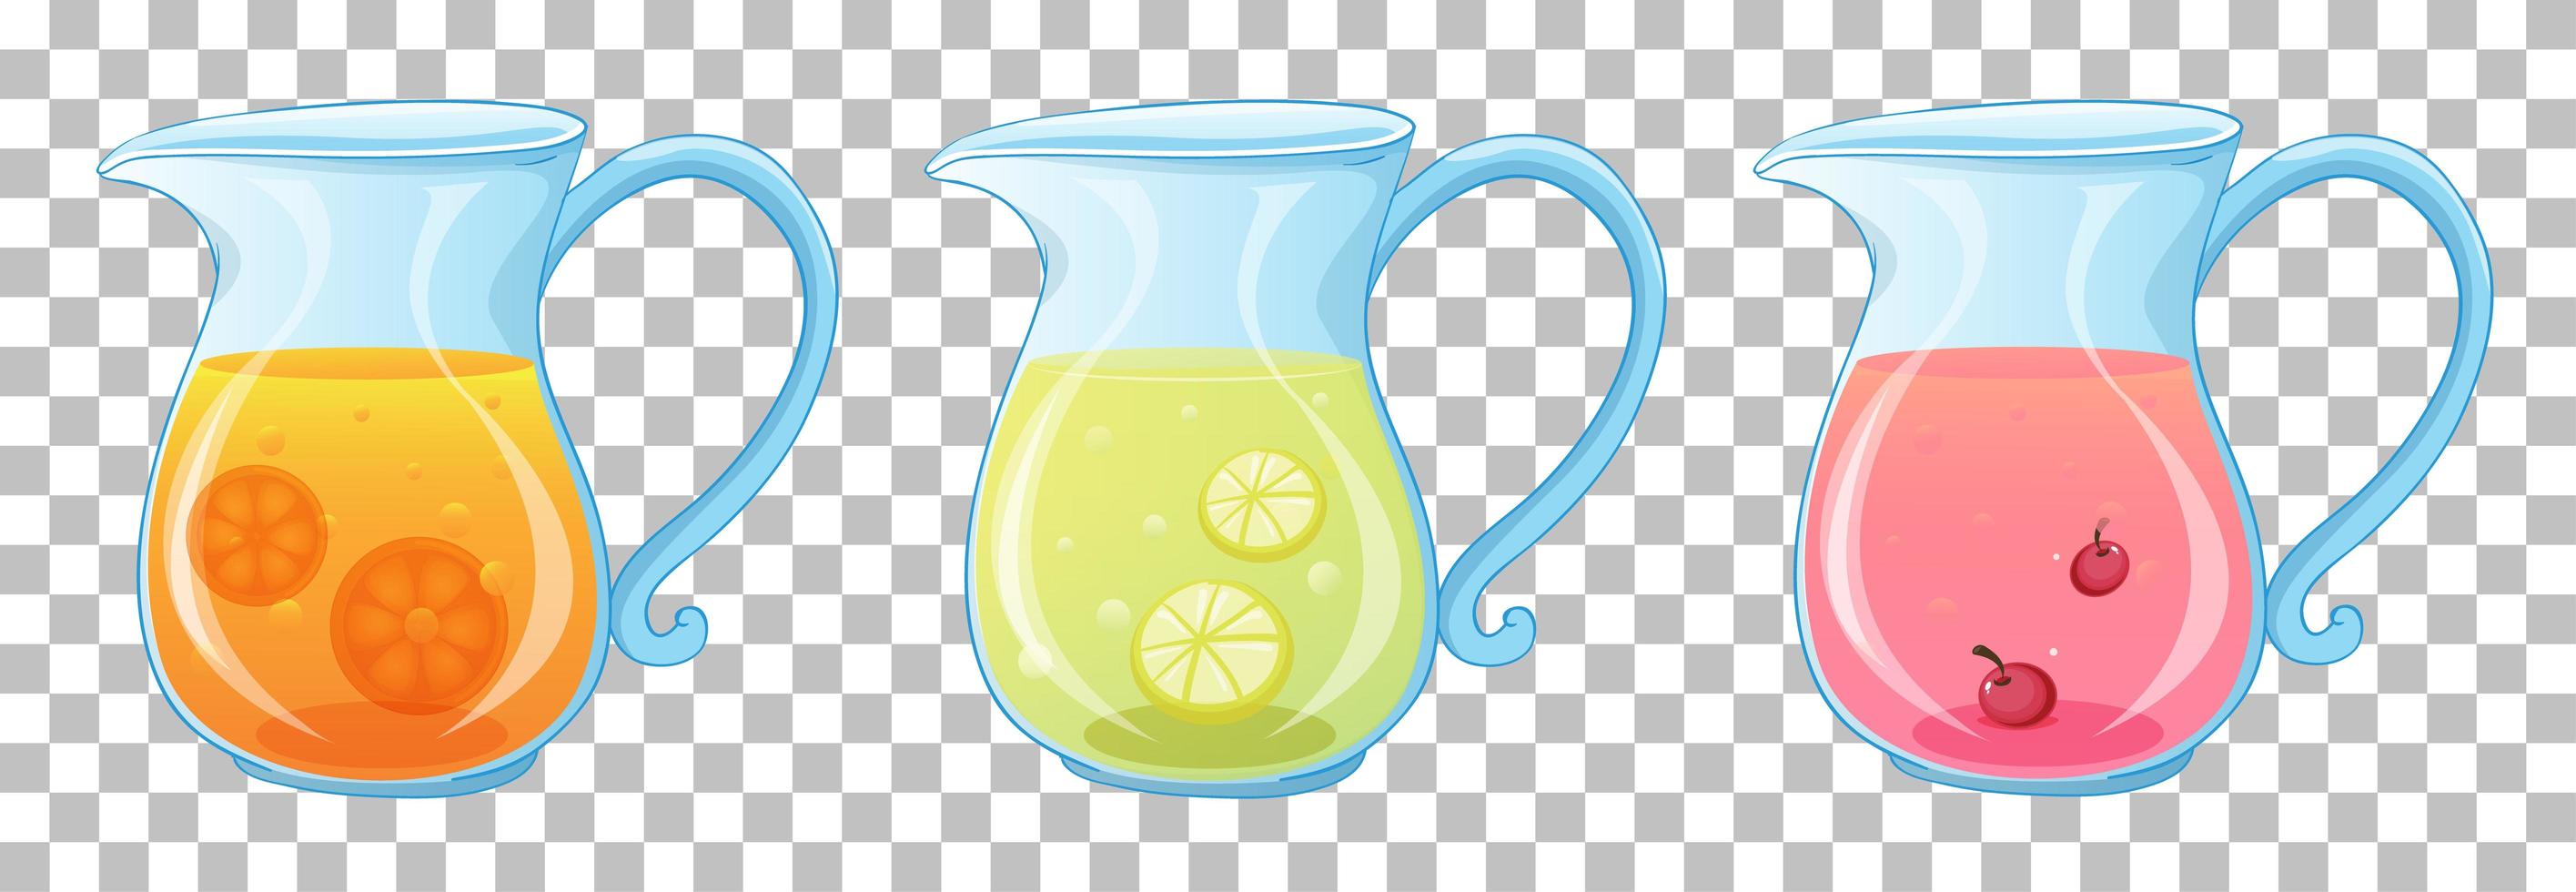 https://static.vecteezy.com/system/resources/previews/001/436/658/non_2x/set-of-different-types-of-fruit-juice-in-jars-isolated-on-transparent-background-free-vector.jpg